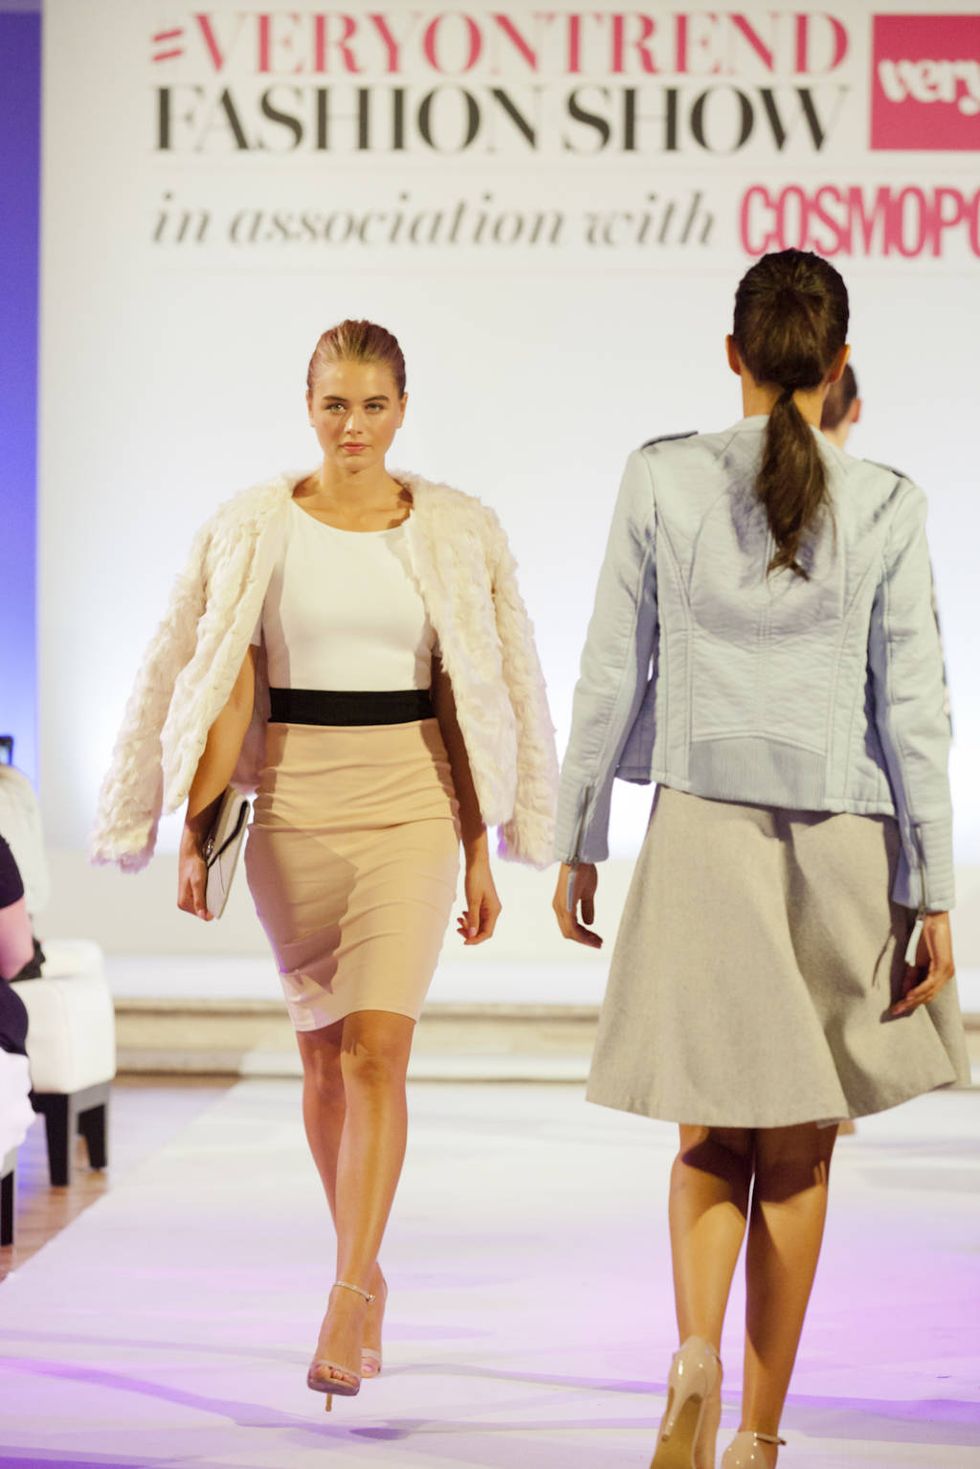 Winter Pastel looks from the VeryOnTrend catwalk show with Cosmopolitan